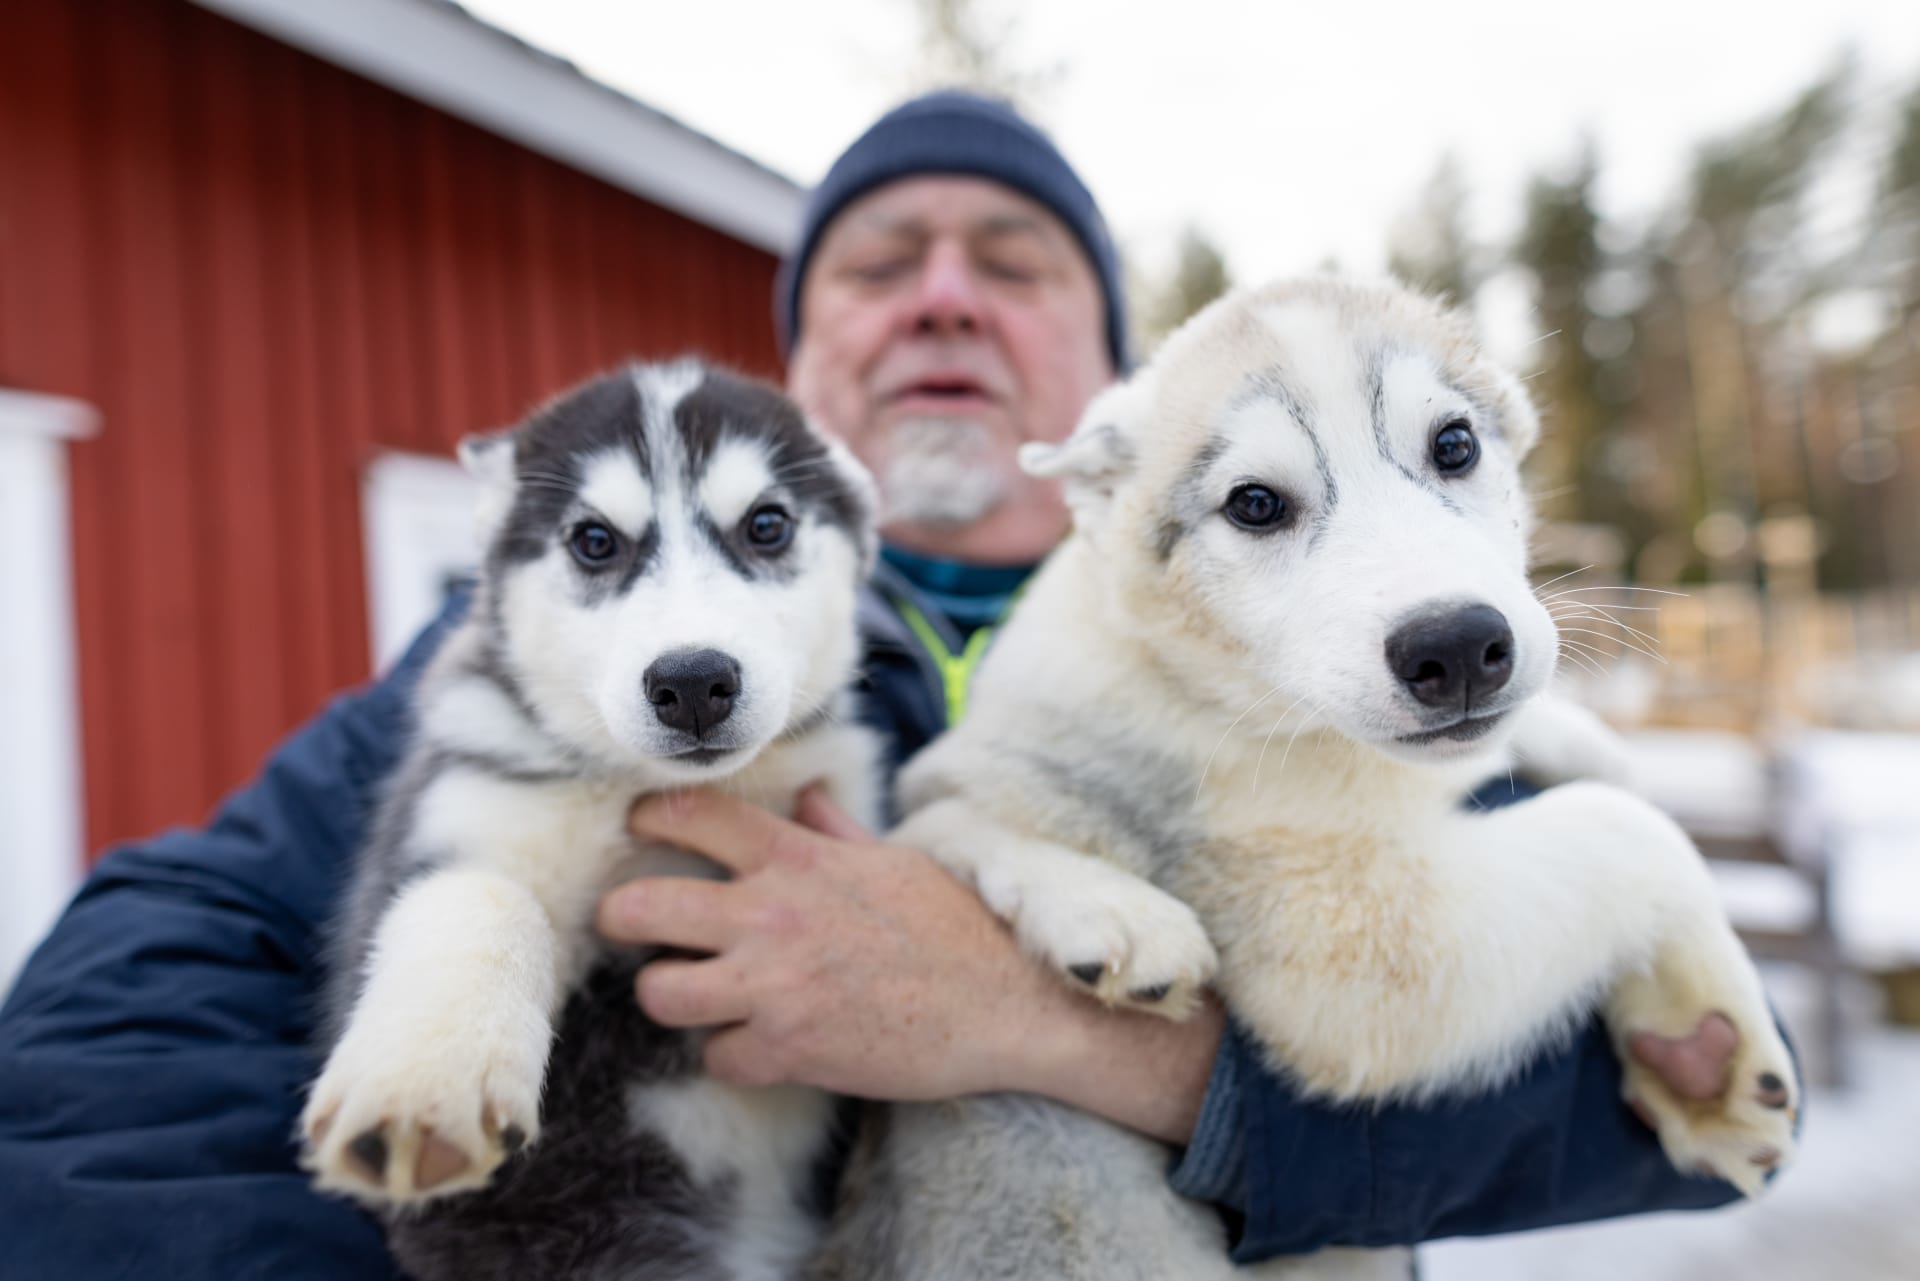 Musher Pascal with husky puppies